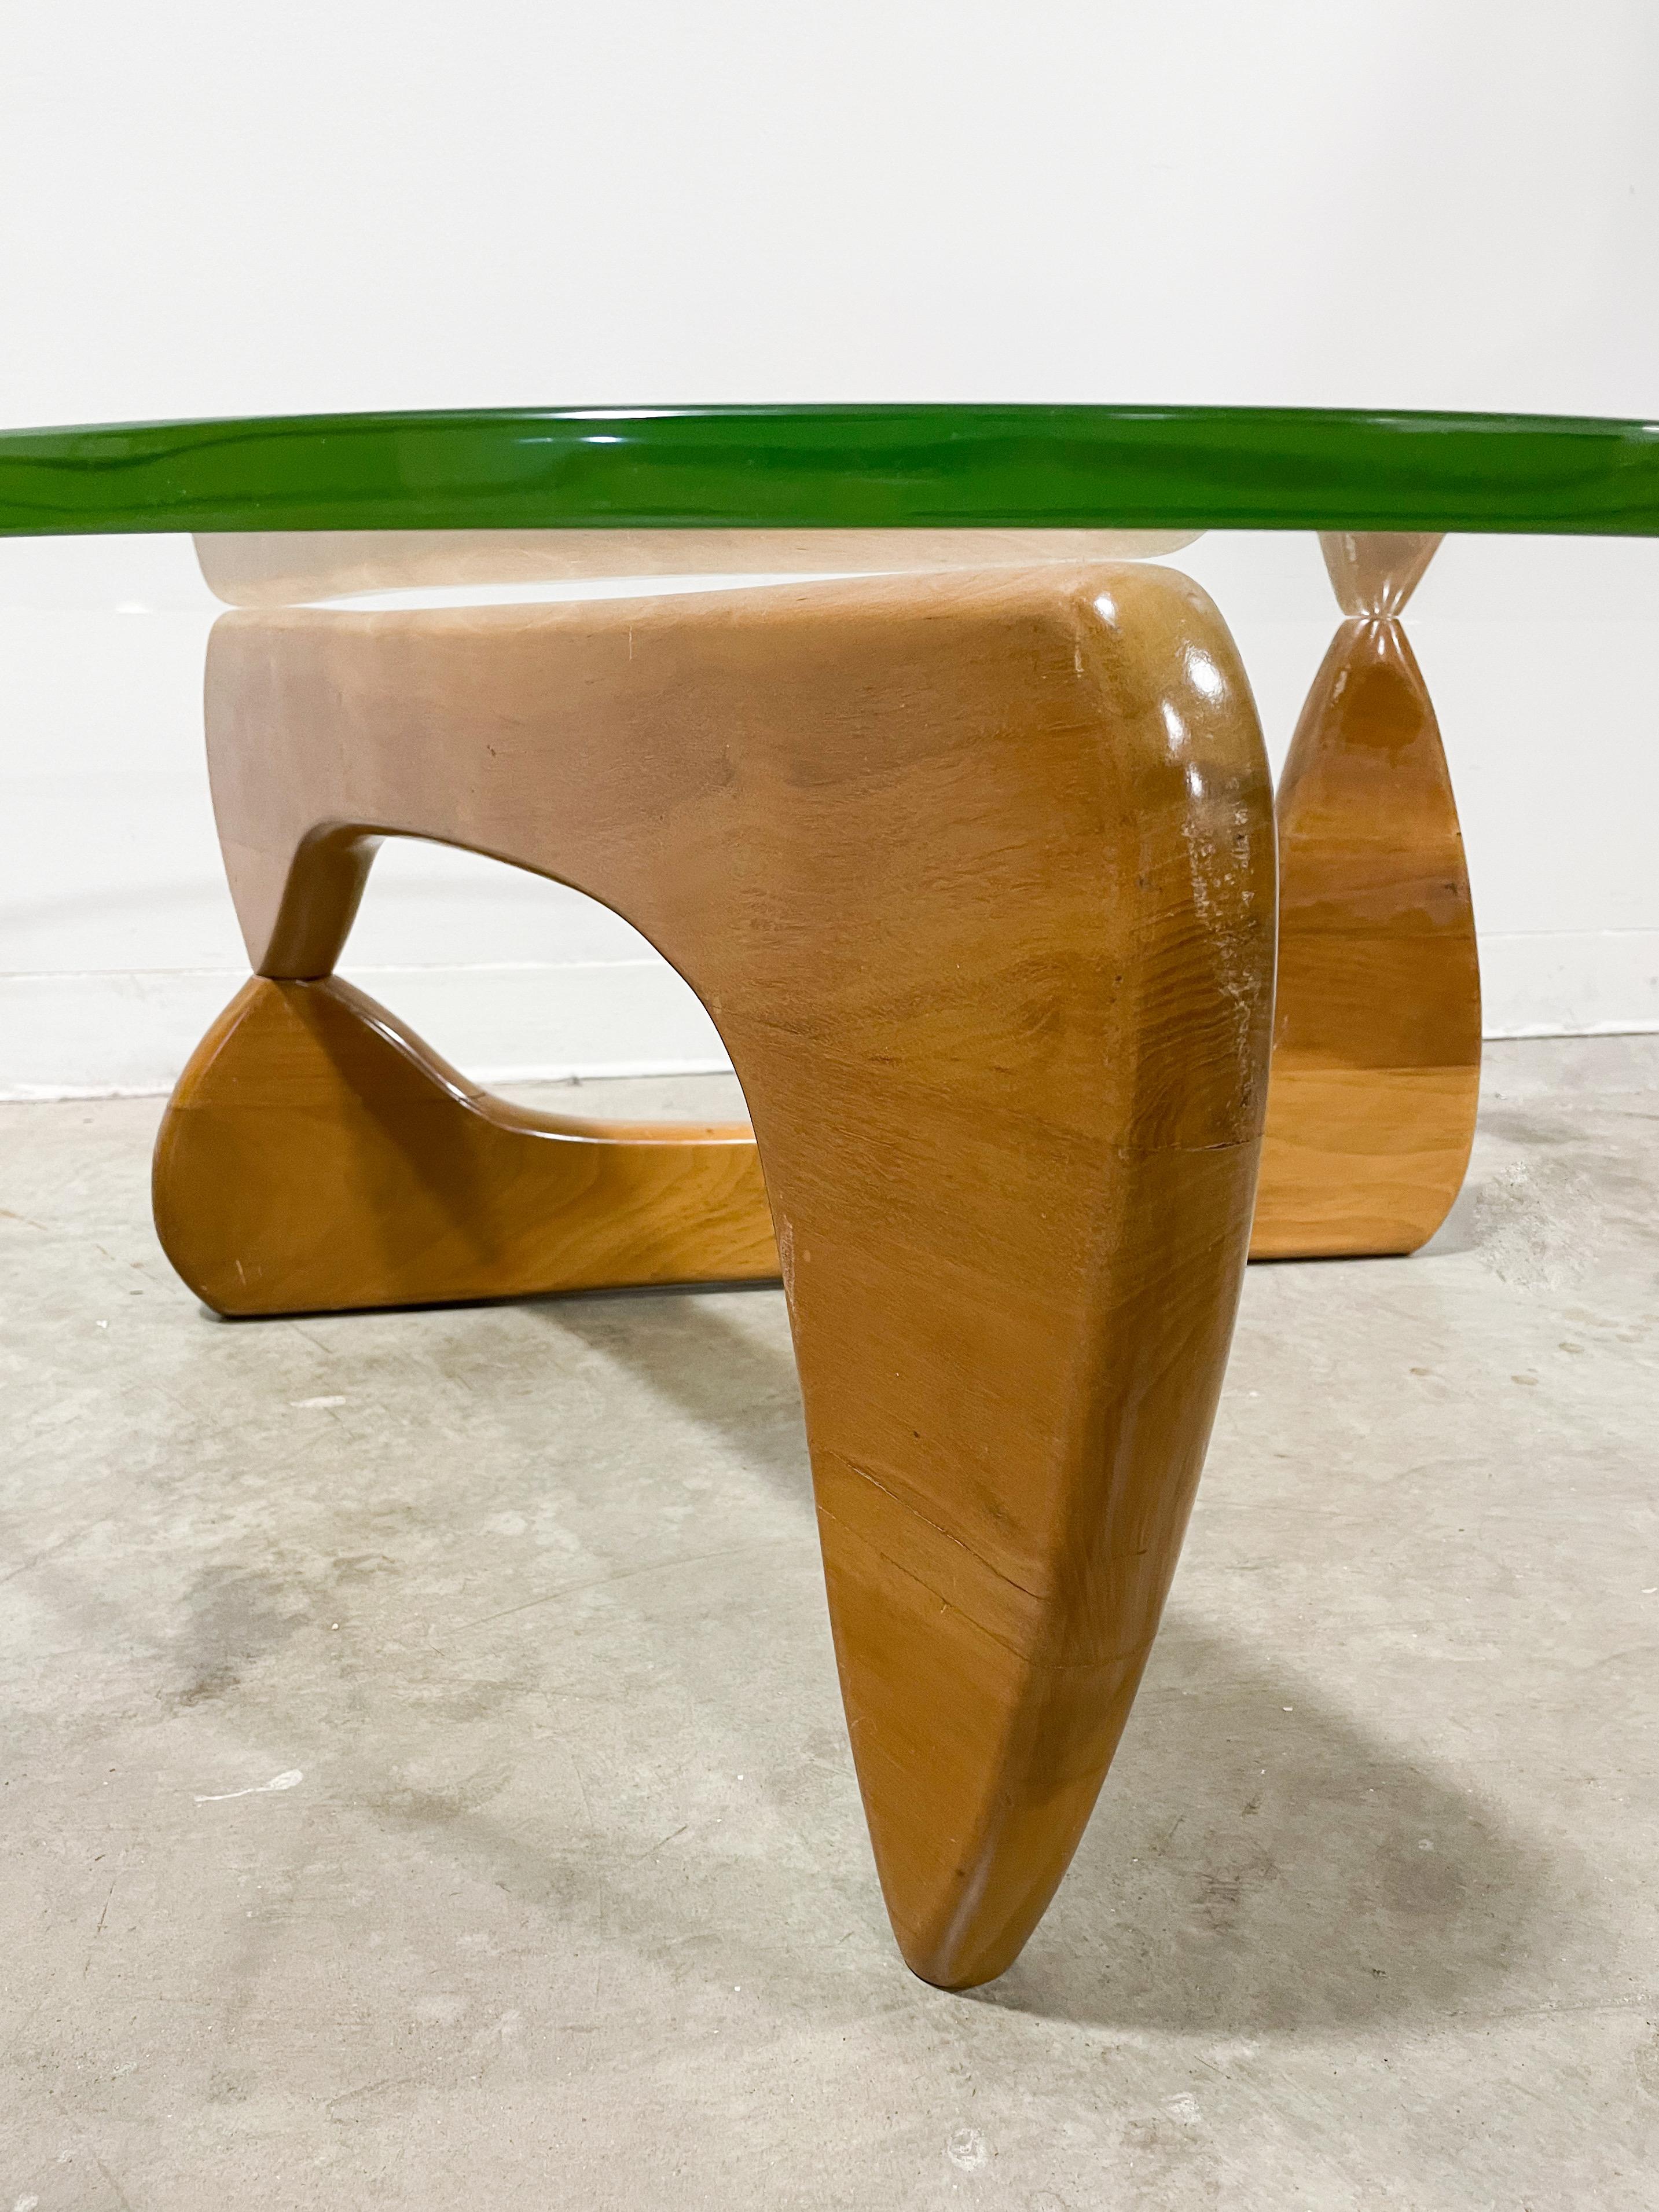 Late 1940s/early 1950s production of the world's most famous modern coffee table, designed by Isamu Noguchi and made by Herman Miller. Sculpture and function are one with the organic form base in solid walnut consisting of two matching halves simply